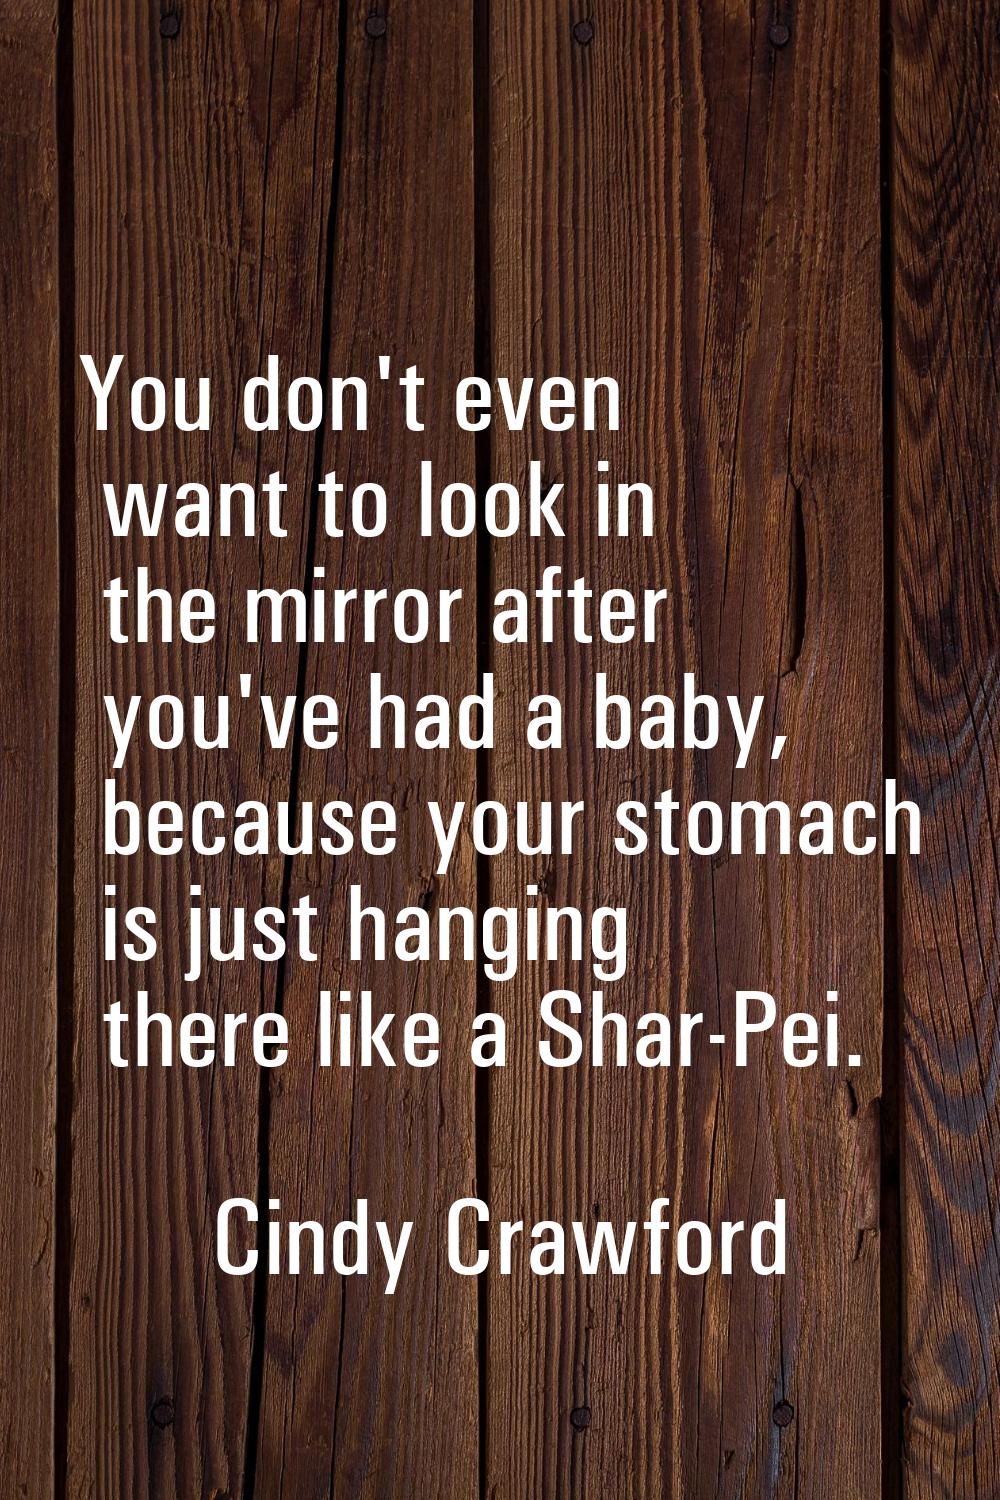 You don't even want to look in the mirror after you've had a baby, because your stomach is just han